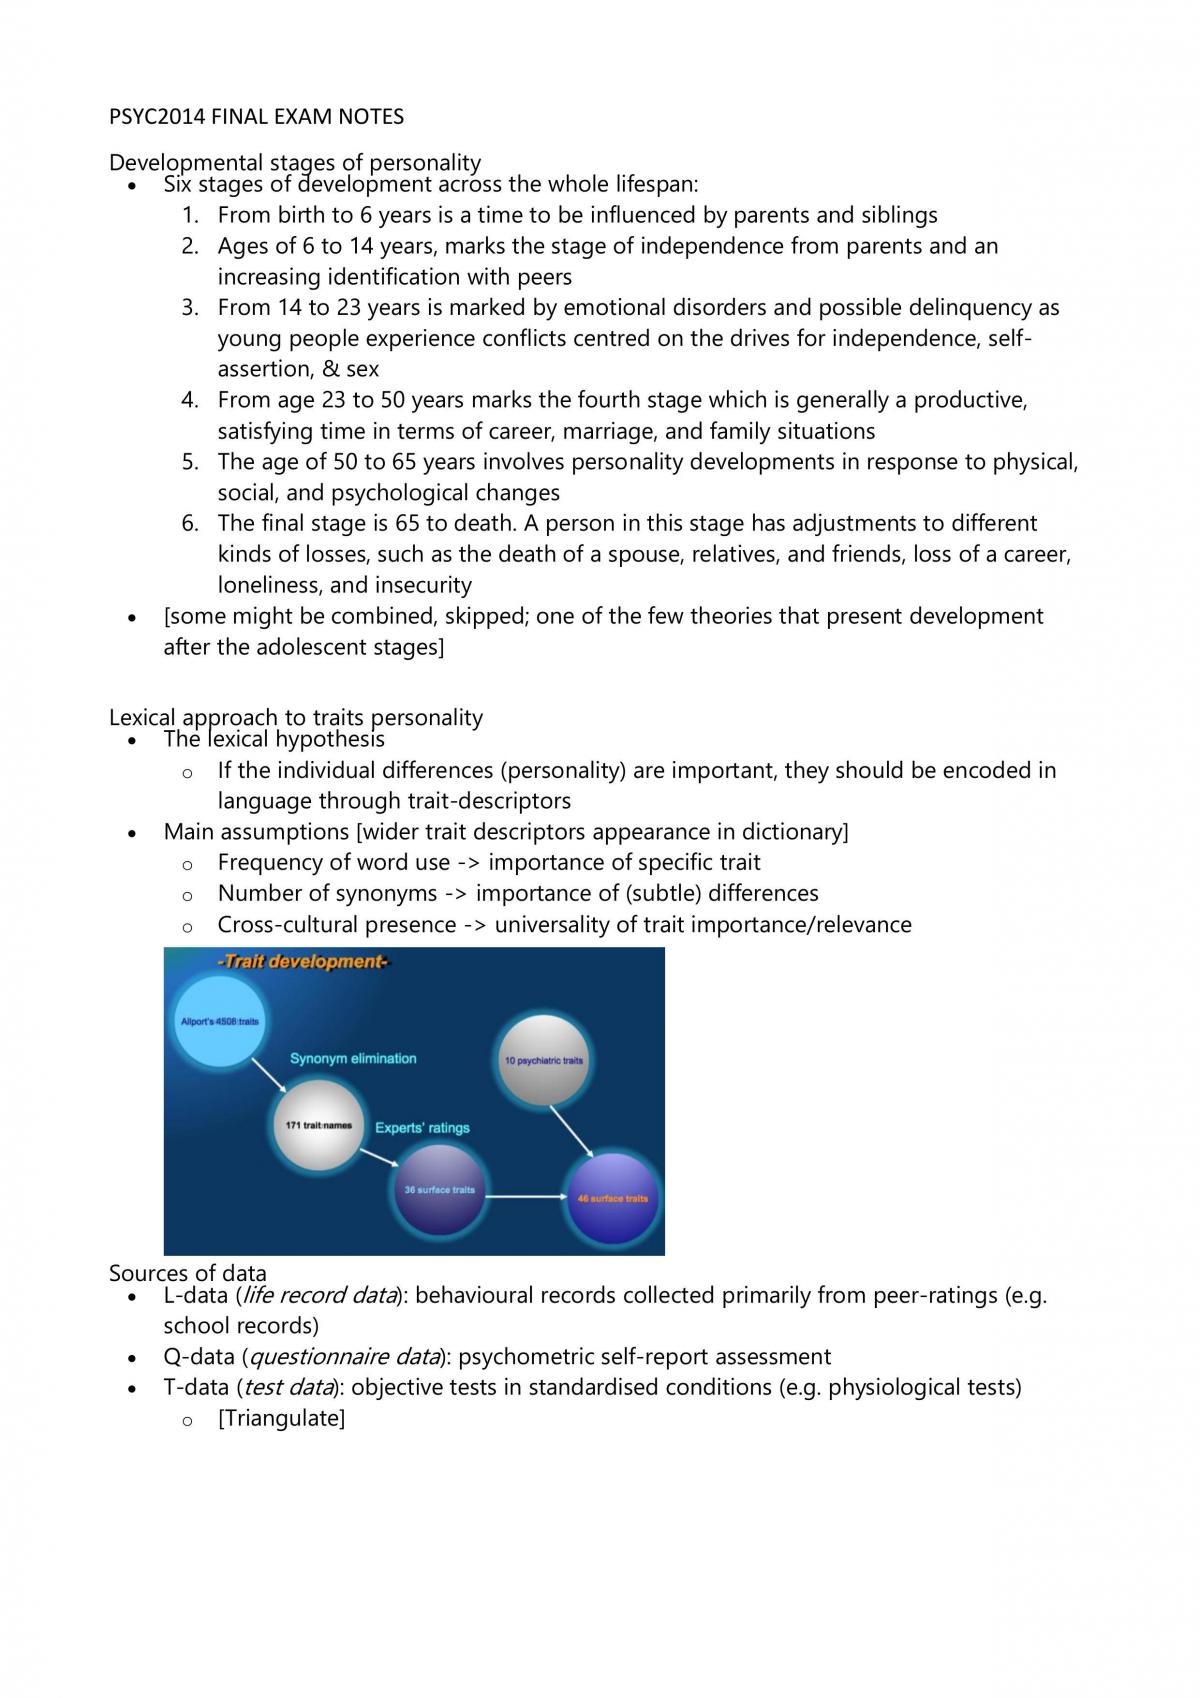 Complete Psychometrics and Personality Notes - Page 17